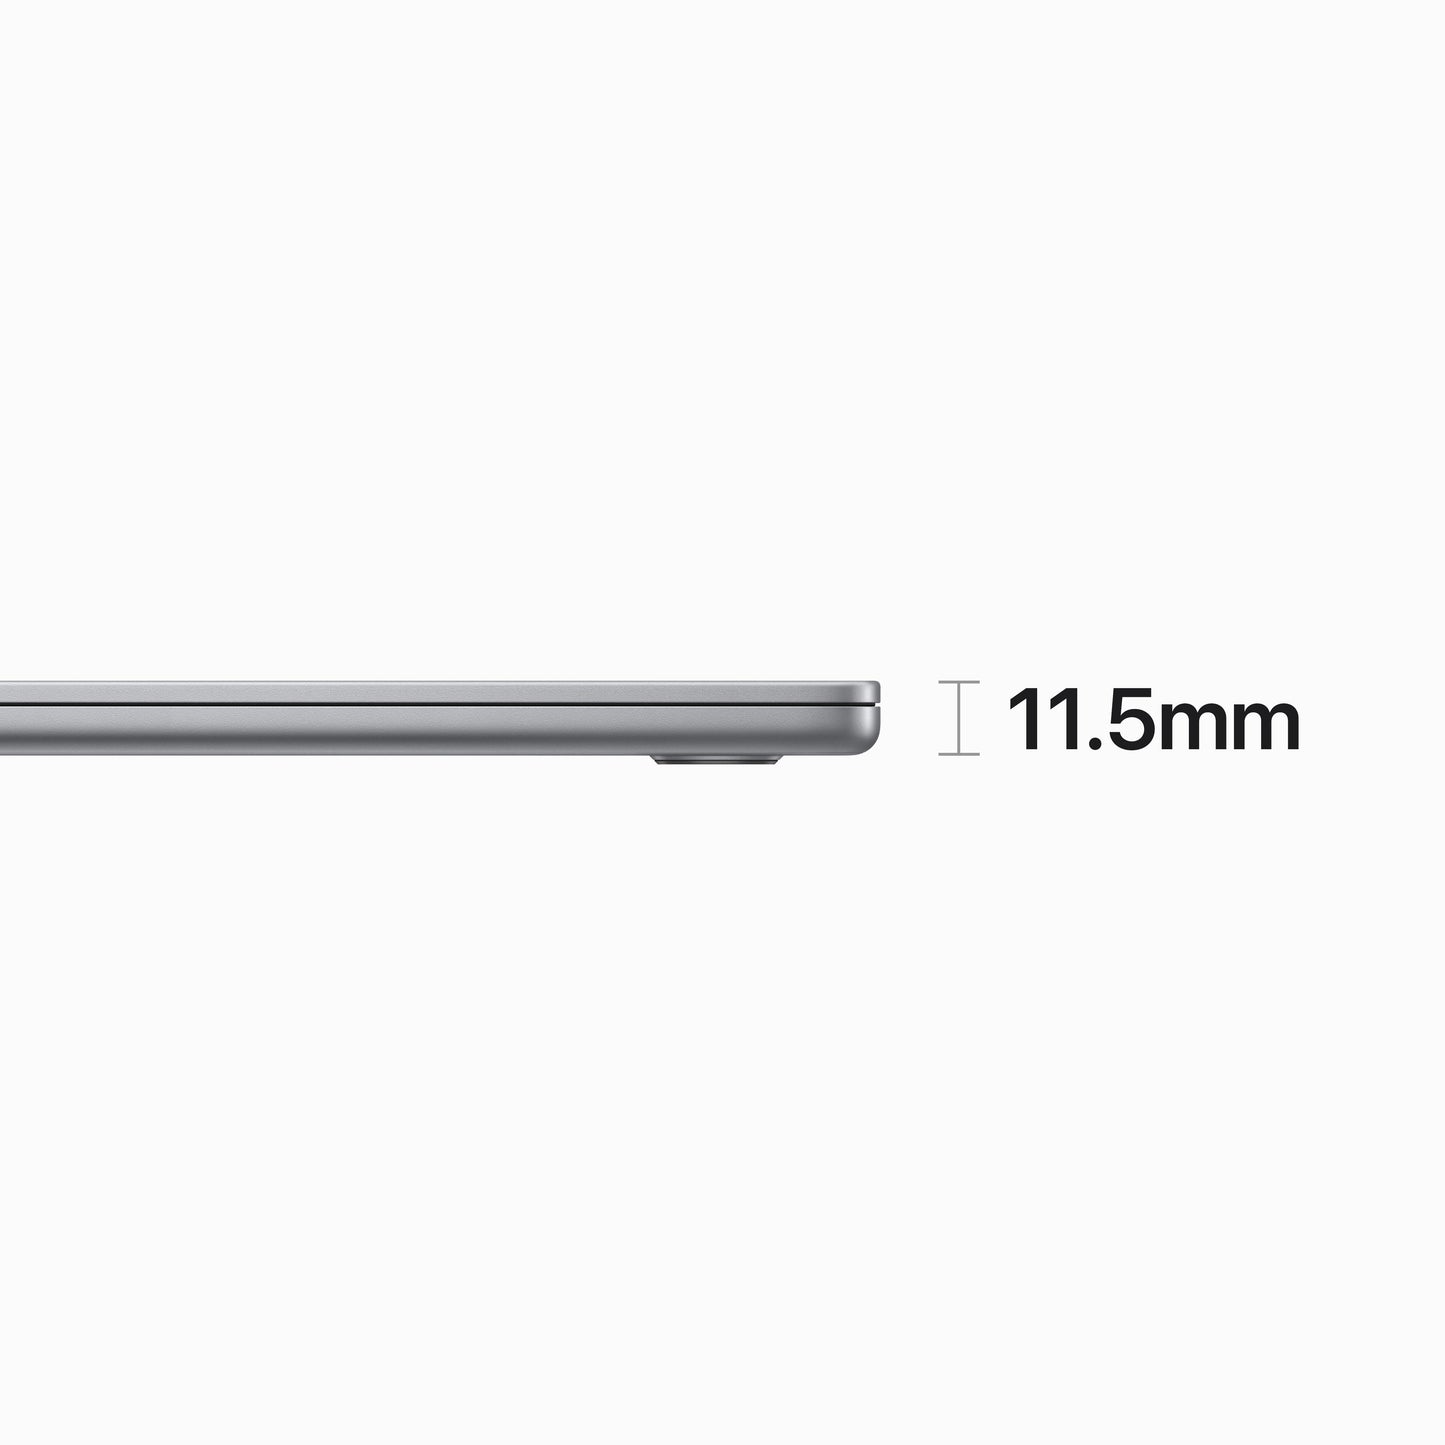 15-inch MacBook Air: Apple M2 chip with 8‑core CPU and 10‑core GPU, 256GB SSD - Space Grey